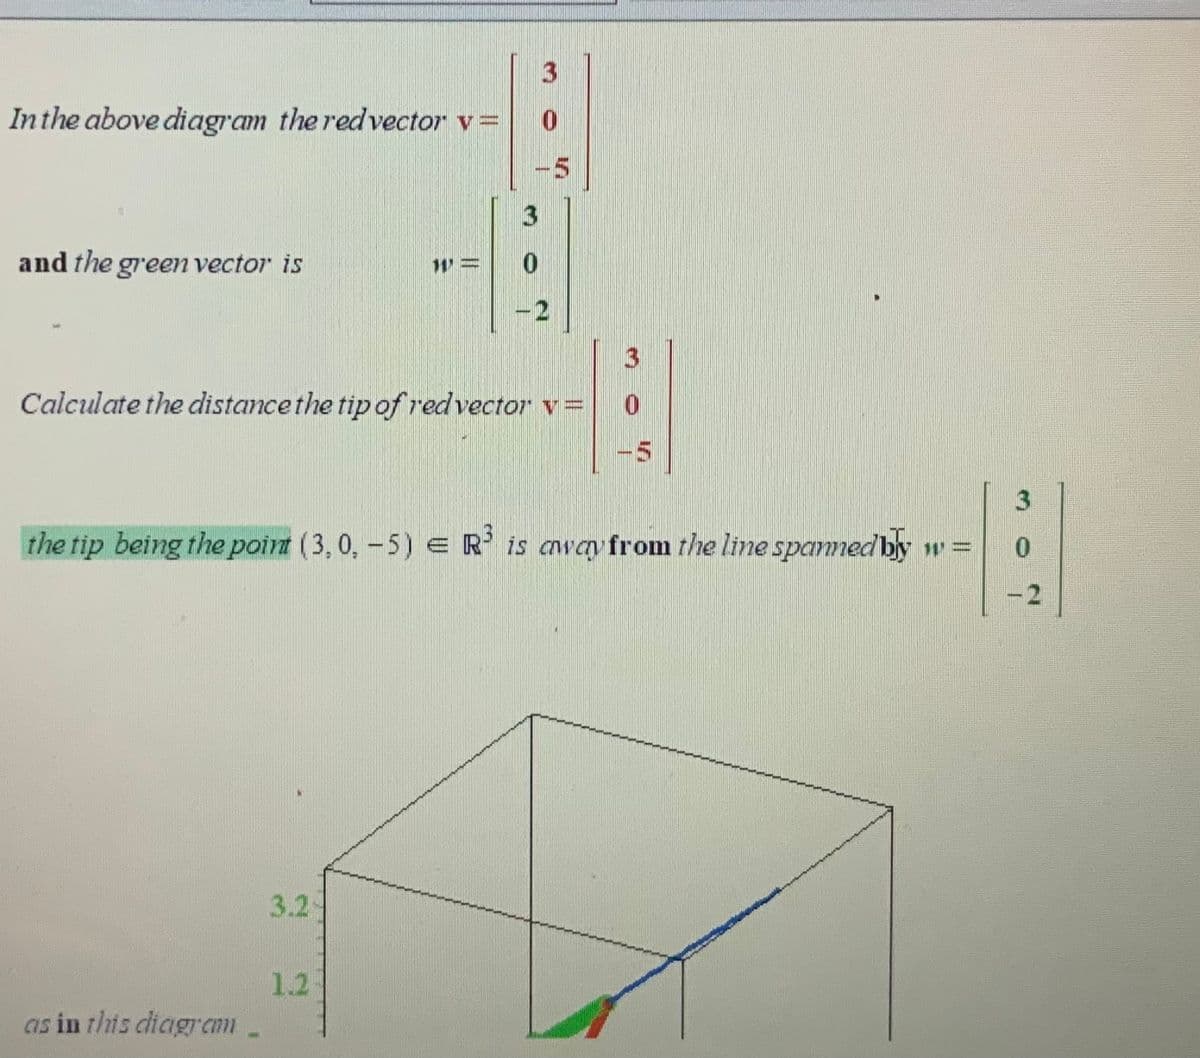 3
Inthe above diagram the redvector v=
5.
and the green vector is
-2
Calculate the distance the tip of redvector v=
3
the tip being the point (3, 0, - 5) e R' is away from the line spannedby w =
-2
3.2-
1.2
as in this diagr cm
